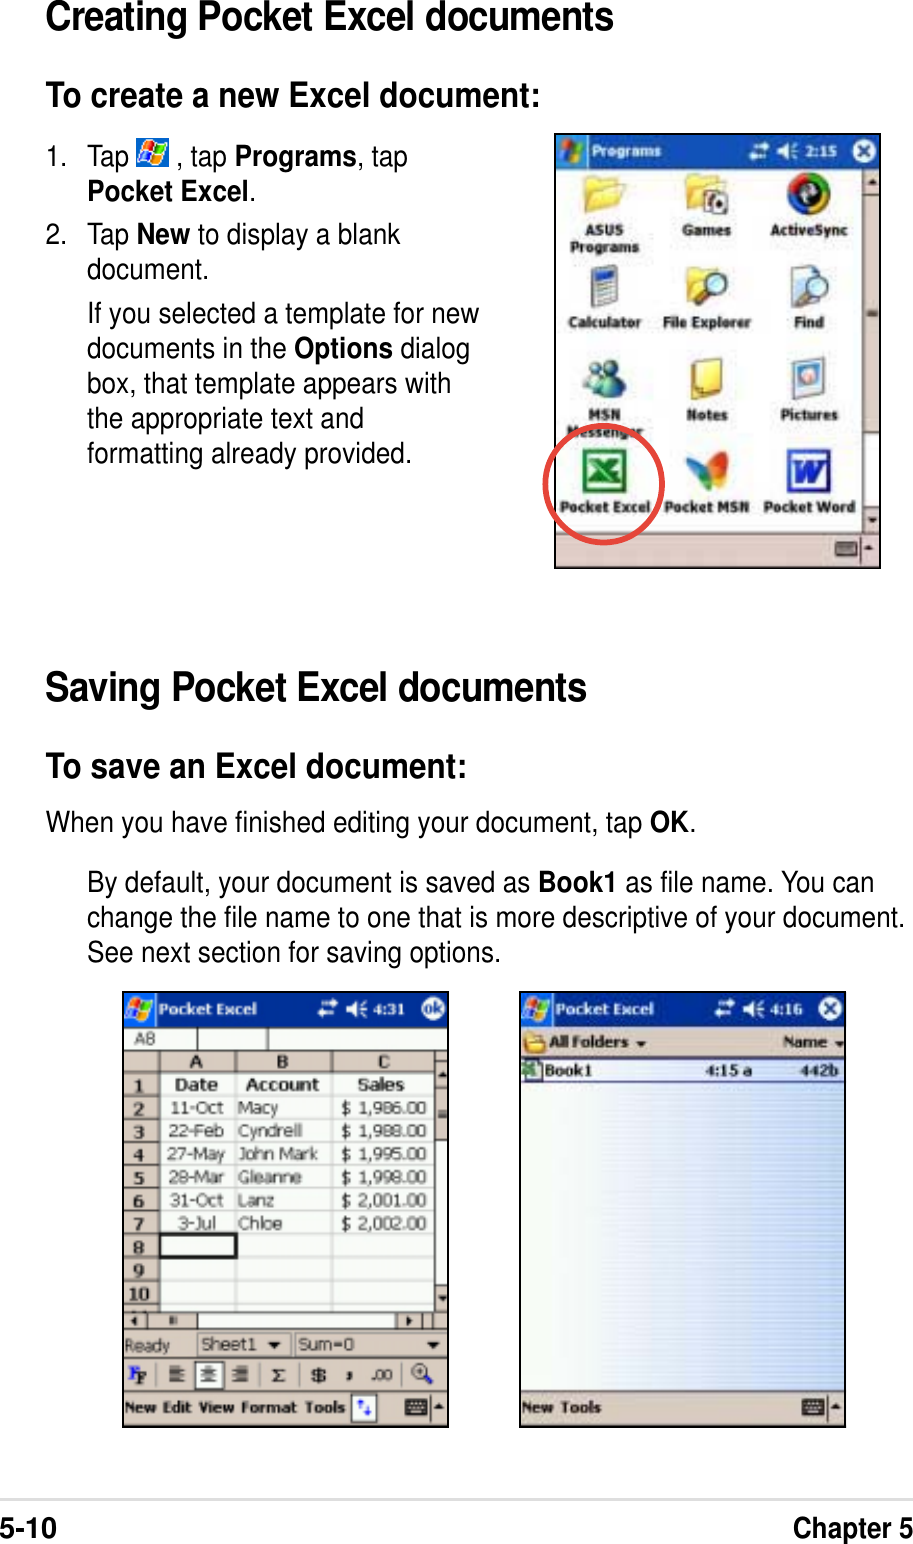 5-10Chapter 5Saving Pocket Excel documentsTo save an Excel document:When you have finished editing your document, tap OK.By default, your document is saved as Book1 as file name. You canchange the file name to one that is more descriptive of your document.See next section for saving options.1. Tap   , tap Programs, tapPocket Excel.2. Tap New to display a blankdocument.If you selected a template for newdocuments in the Options dialogbox, that template appears withthe appropriate text andformatting already provided.Creating Pocket Excel documentsTo create a new Excel document: